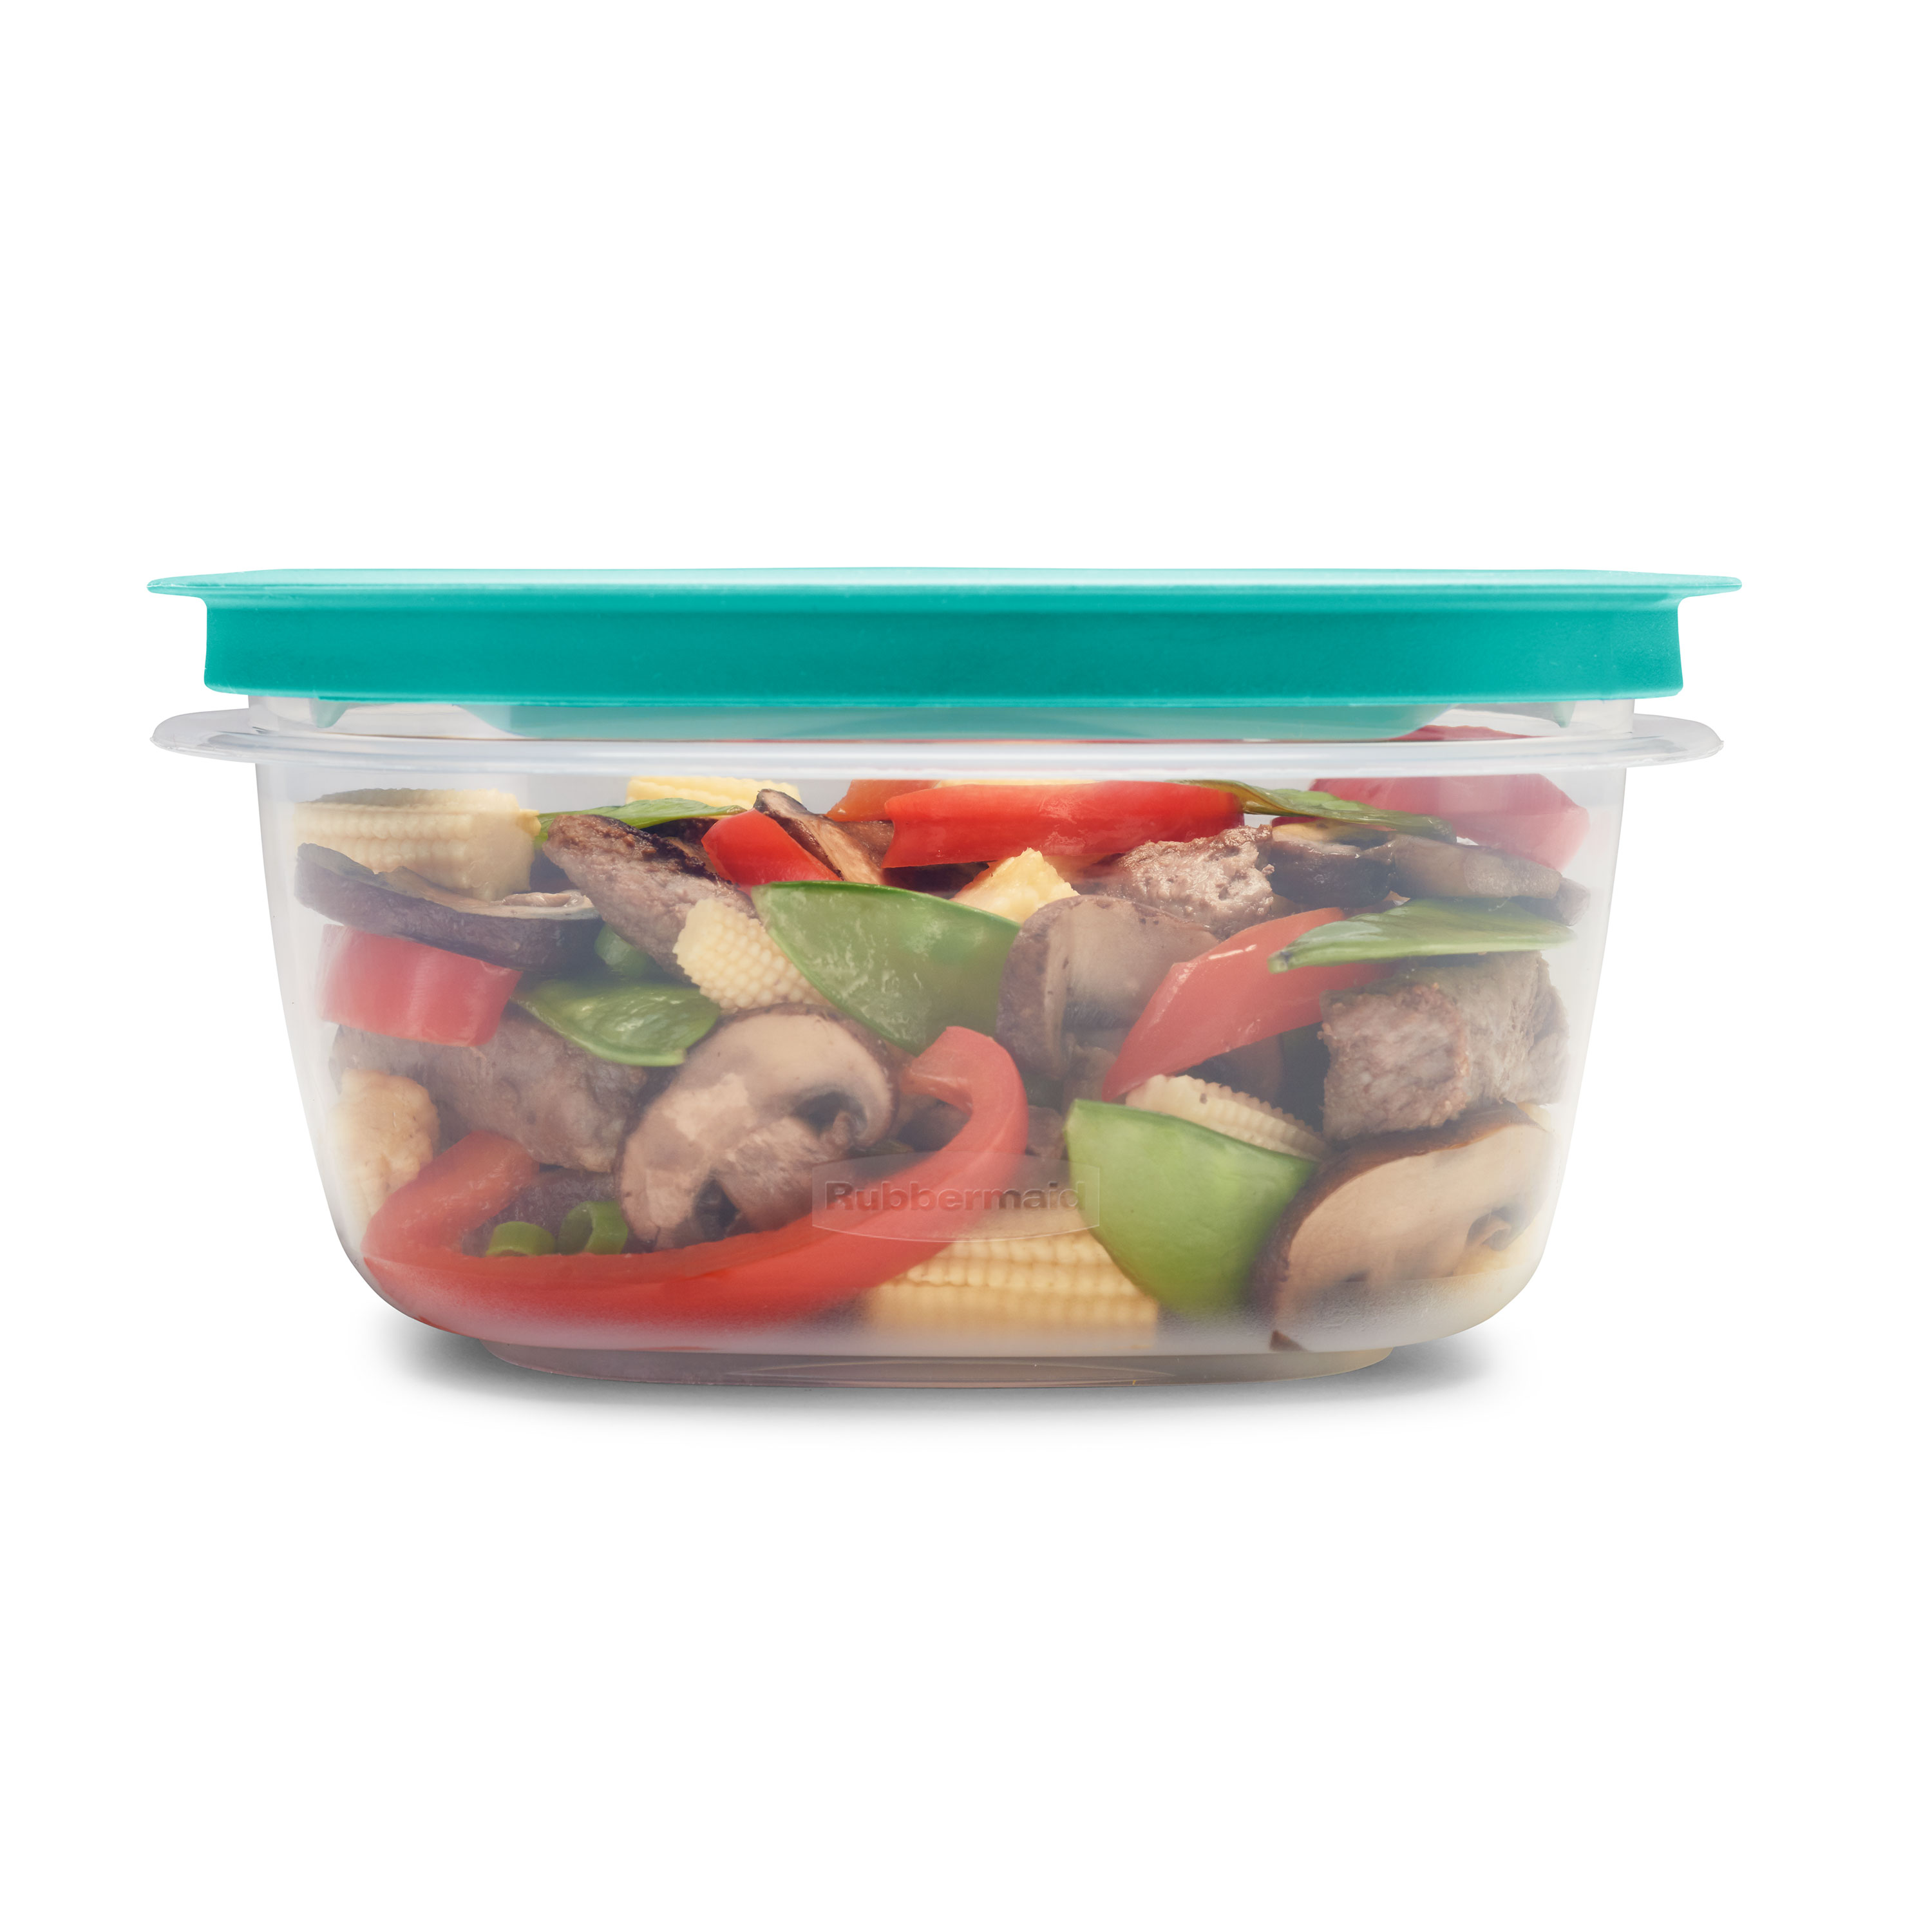 Rubbermaid Press & Lock Easy Find Lids Food Storage Containers, 42-Piece Set - image 4 of 8